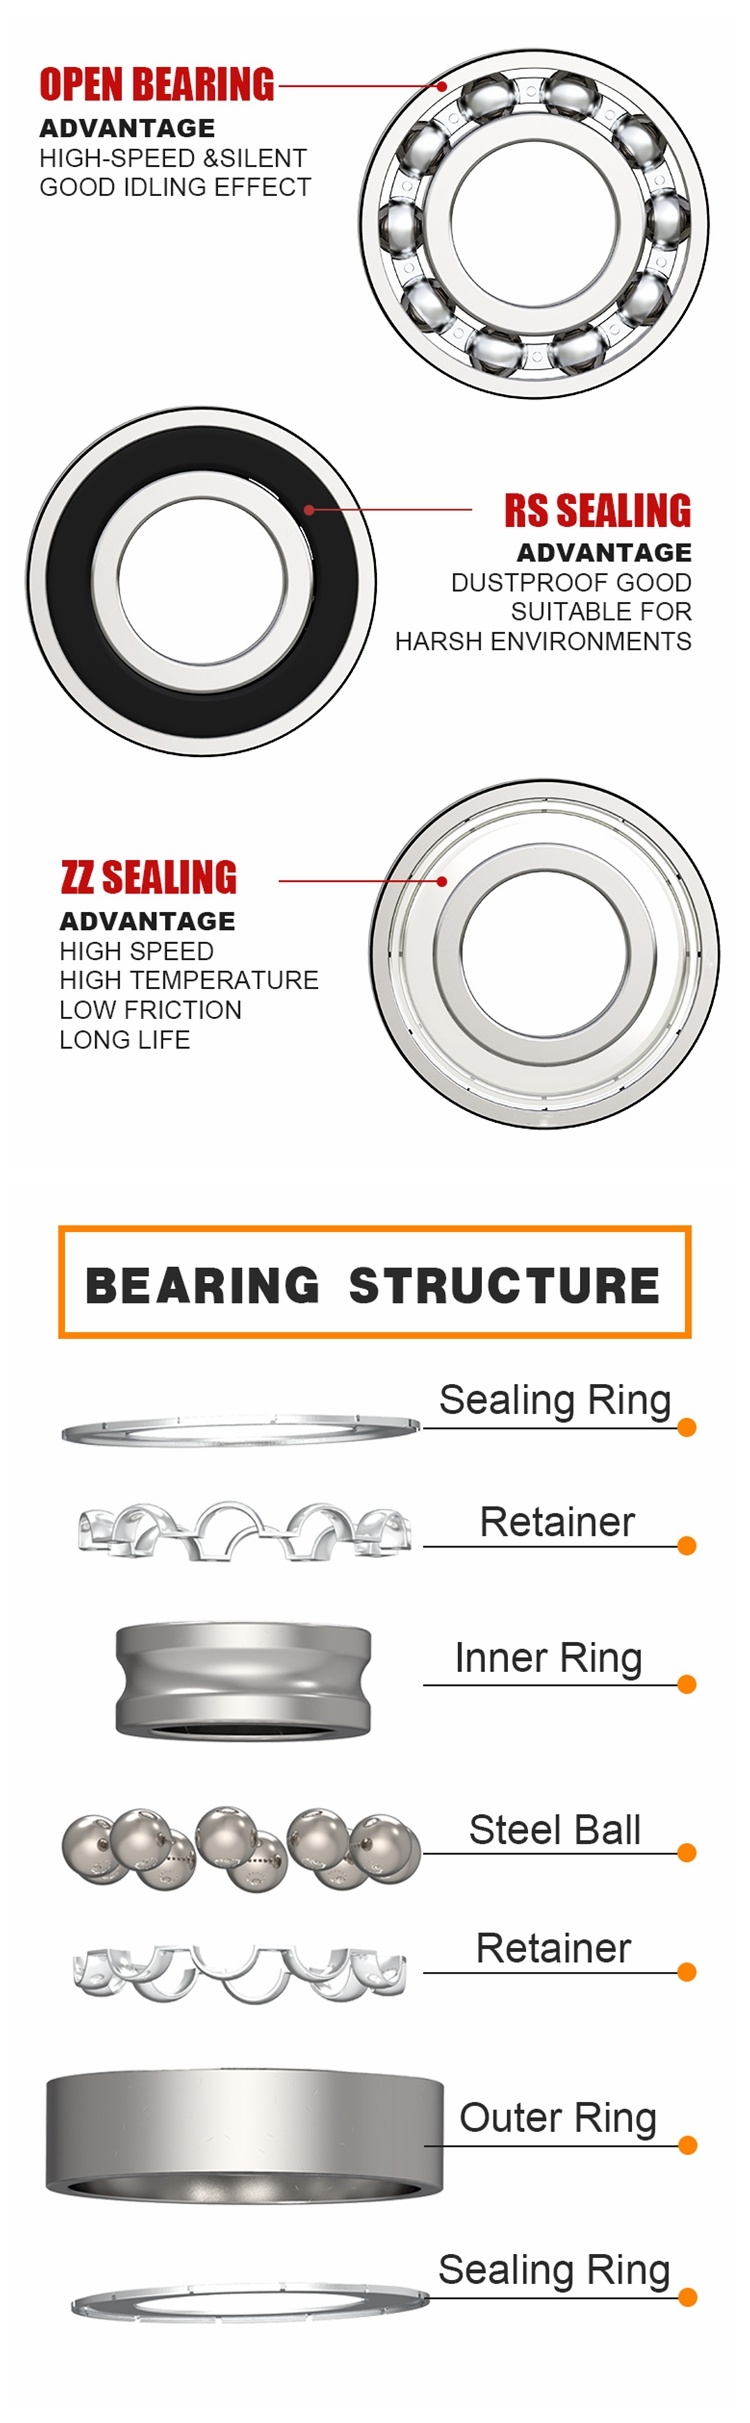 P6 Level Bicycle Bearing Z1 V1 16011 RS Deep Groove Ball Bearing